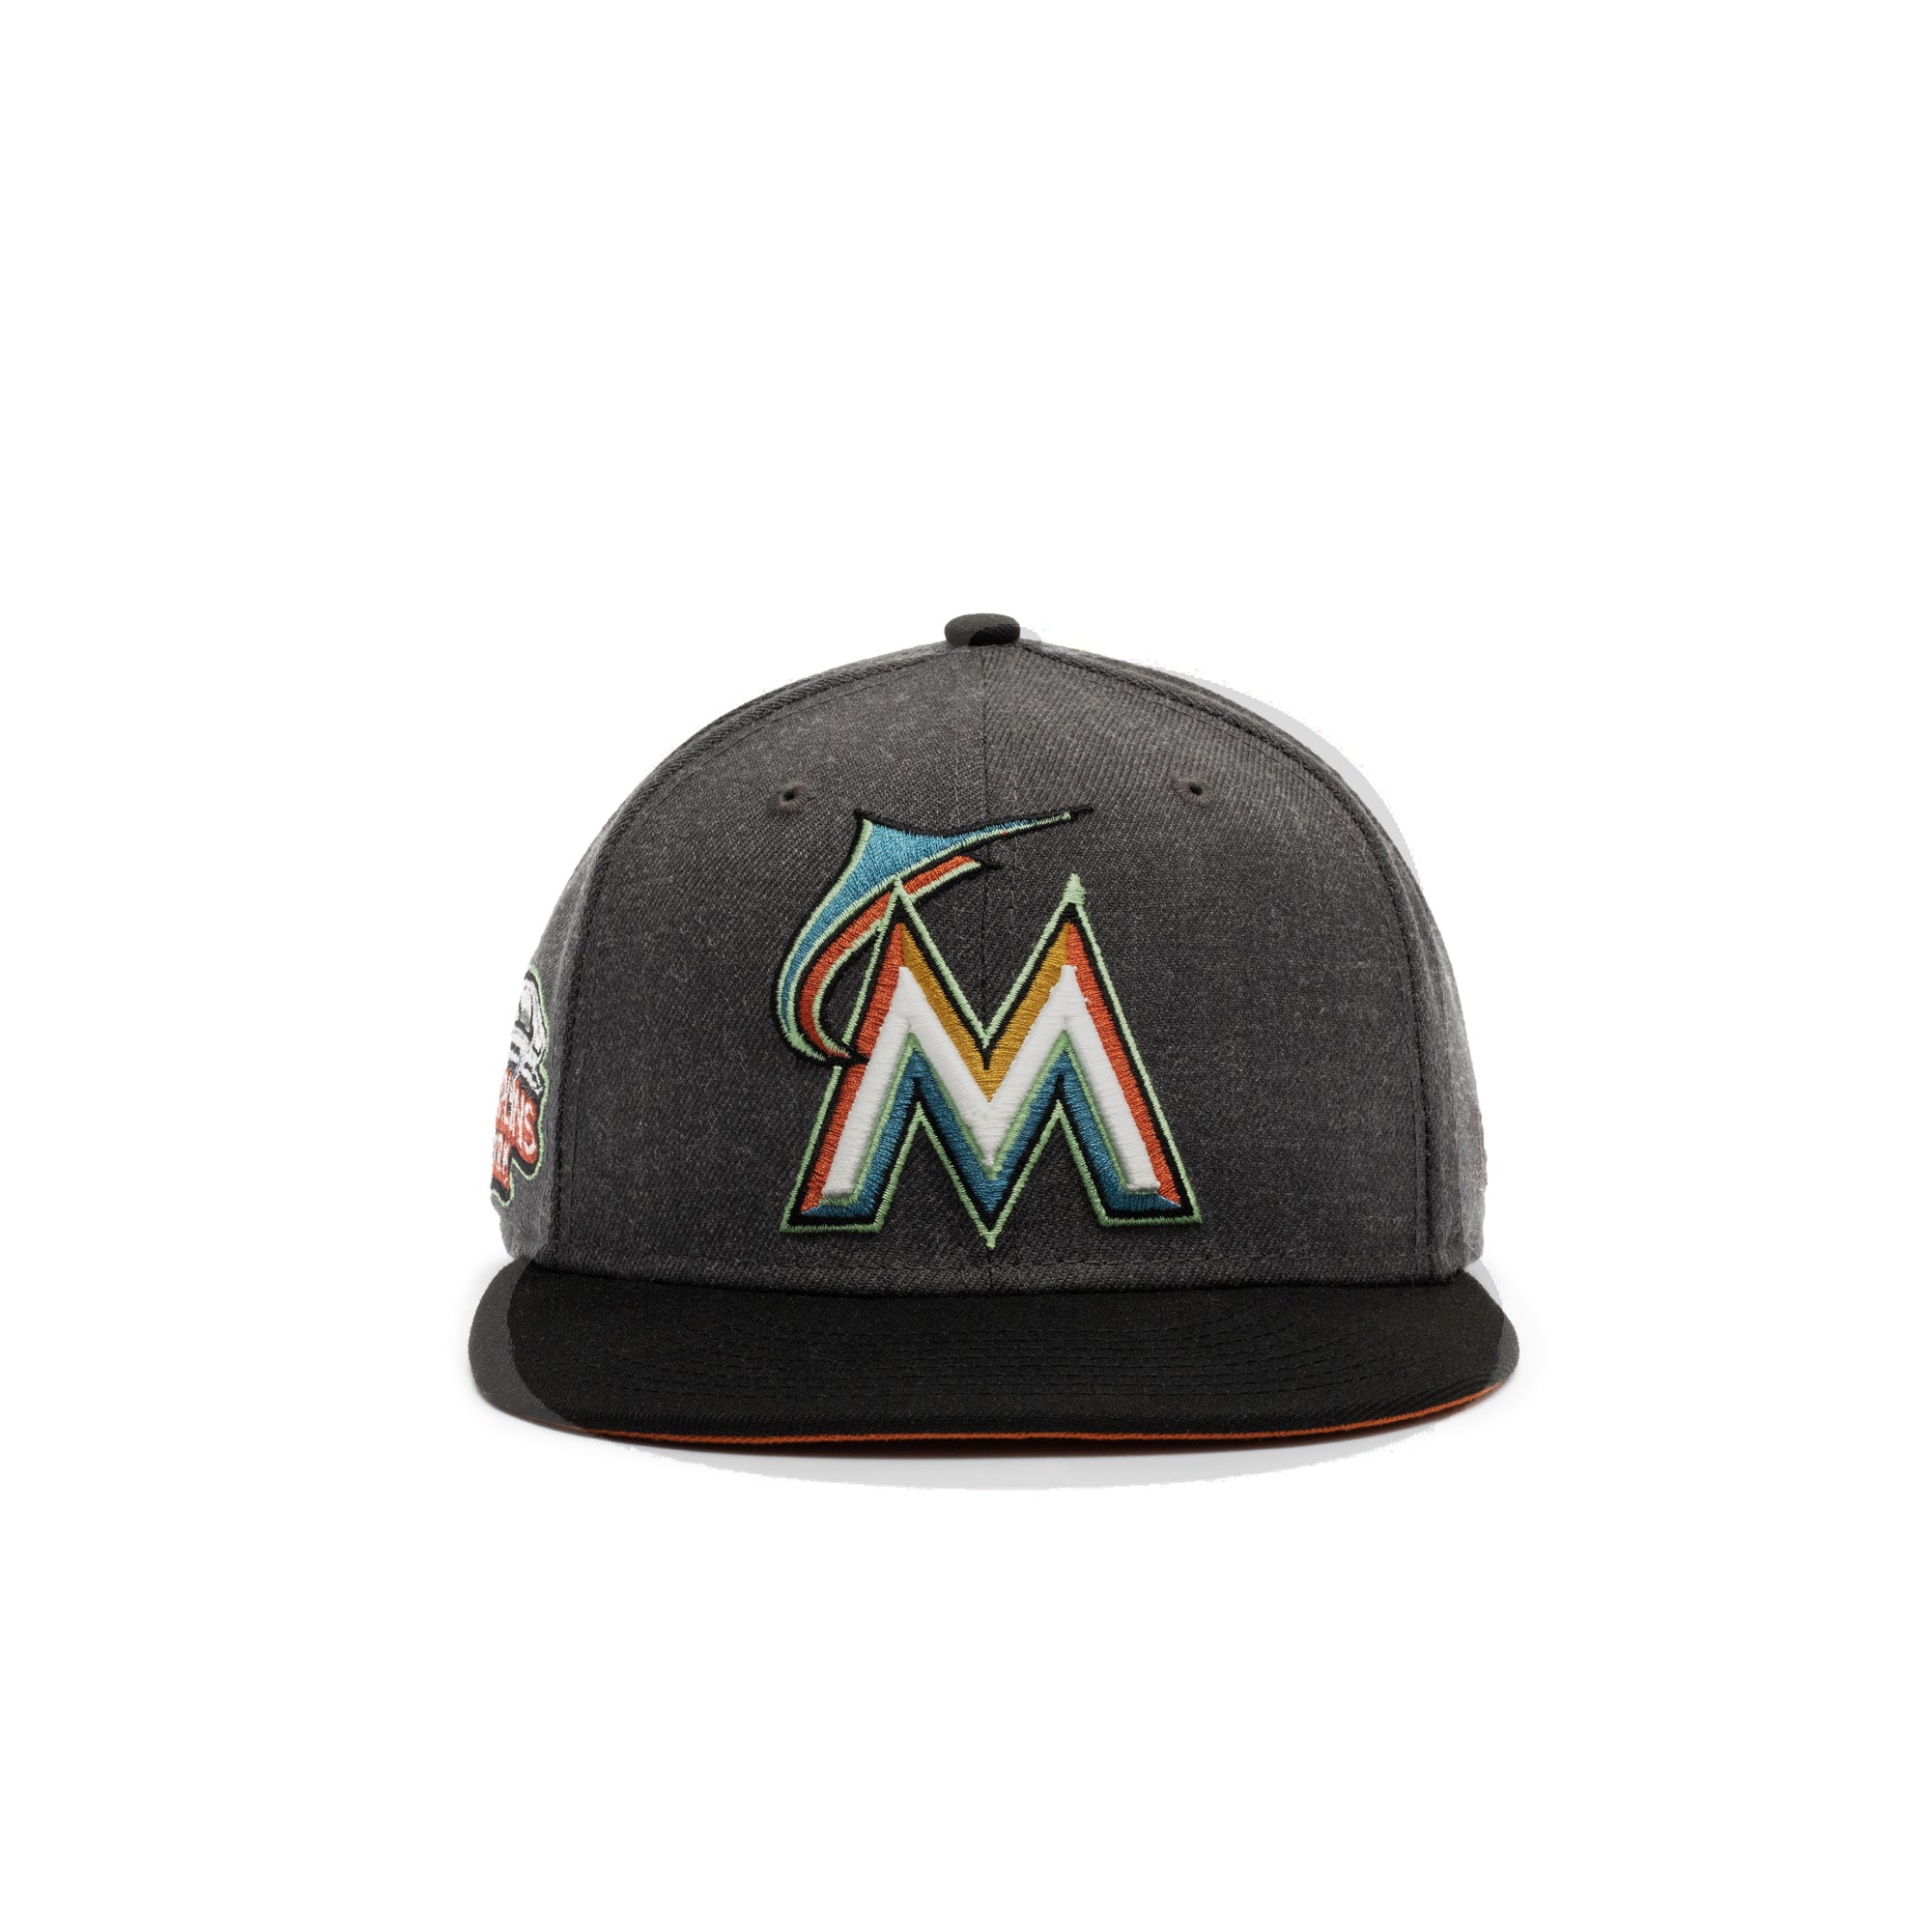 New Era 59FIFTY Miami Marlins Park Patch Fitted Hat